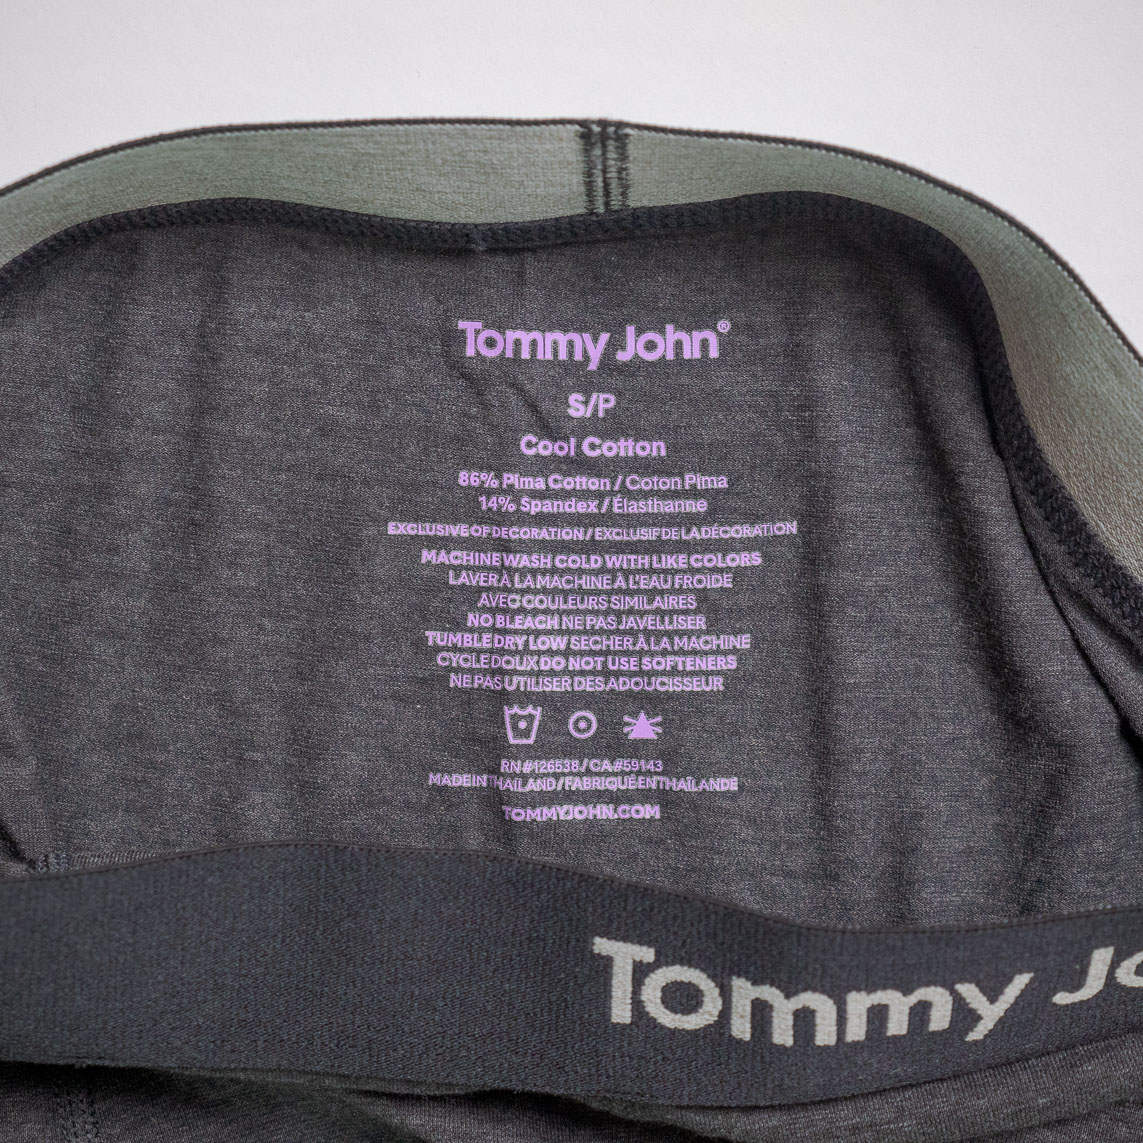 What I love about Tommy John Products. An Honest Review - Shopping With Lori